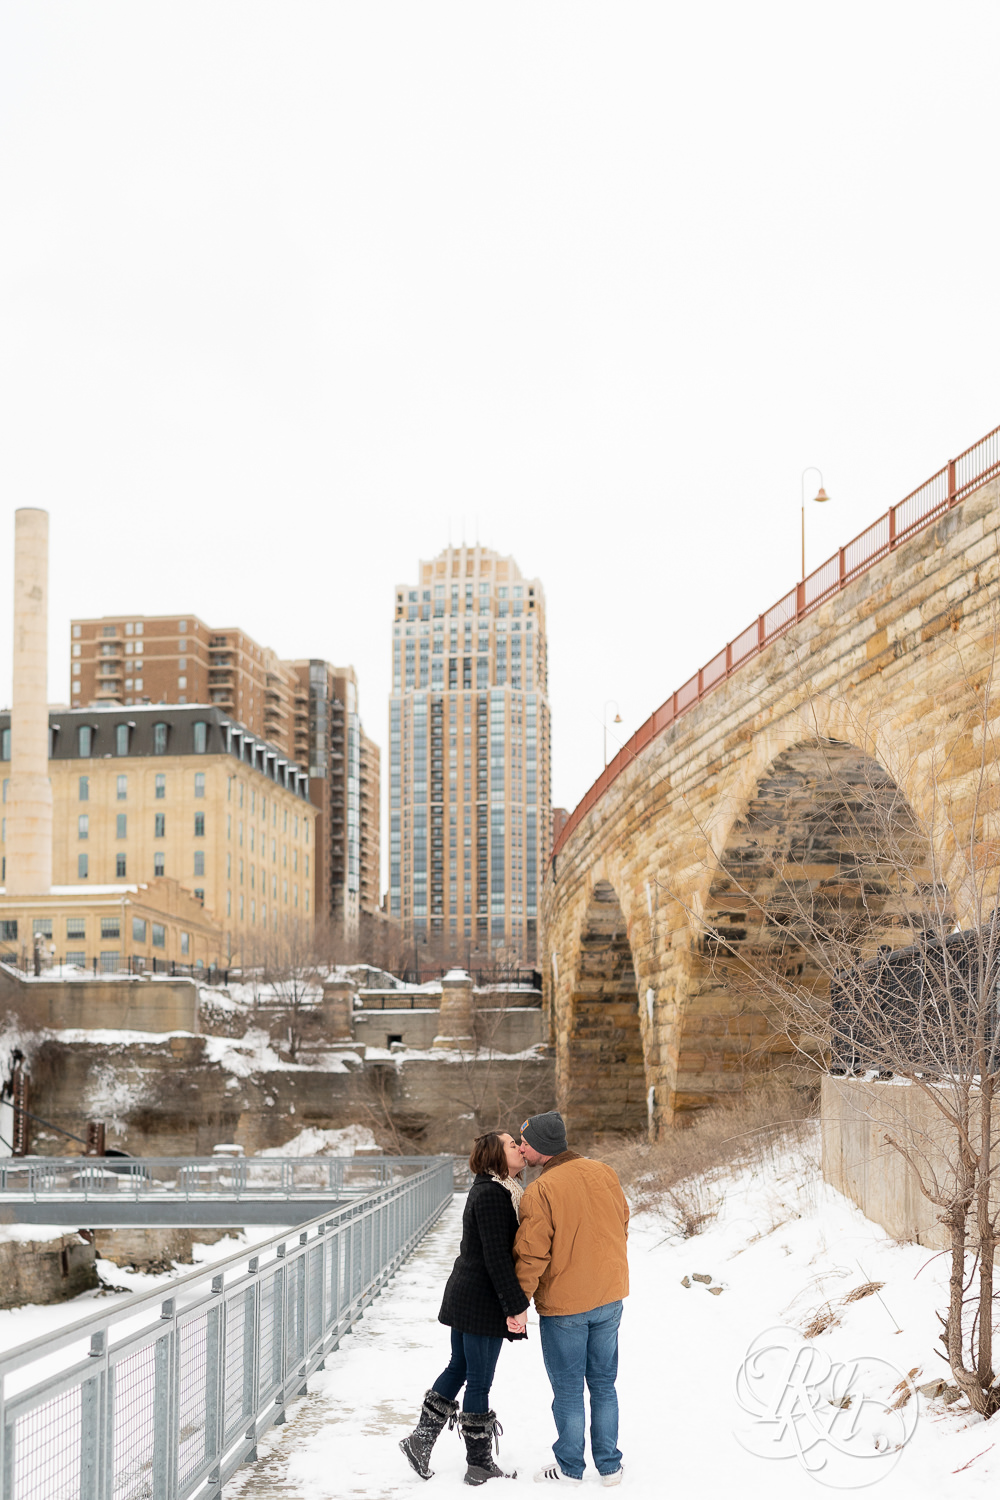 Man and woman walking in snow at Mill City Ruins in Minneapolis, Minnesota.